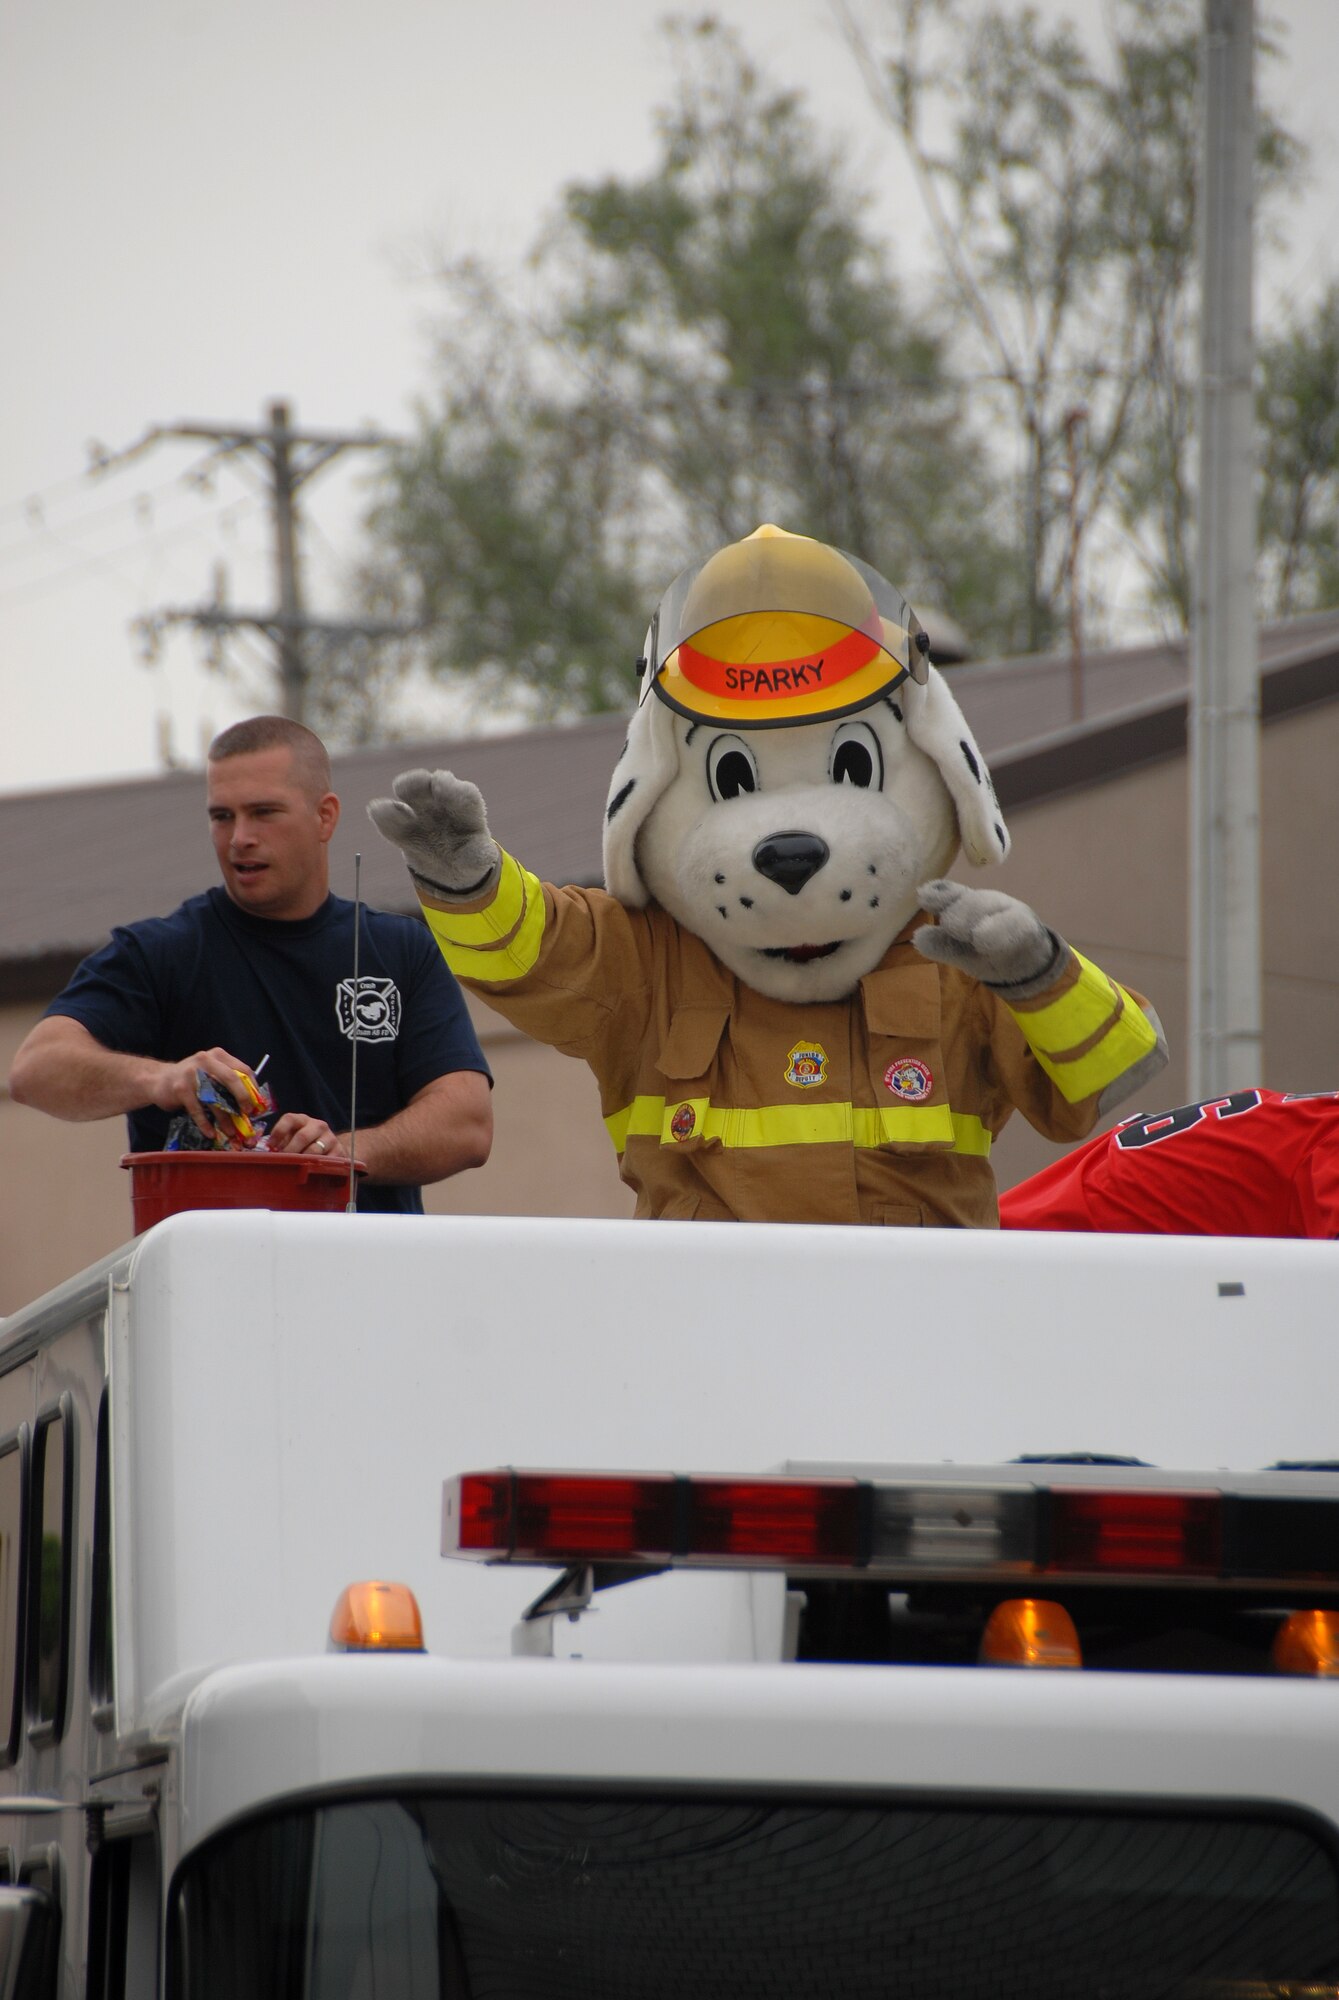 OSAN AIR BASE, Republic of Korea -- A fireman and his mascot "Sparky" ride on top of a fire truck during the friendship festival, October 13,2007, outside of Osan Air Base October 13, 2007. The friendship festival improves camaraderie between the two countries and improves morale.  (U.S. Air Force Photo by Airman First Class Chad Strohmeyer)(RELEASED